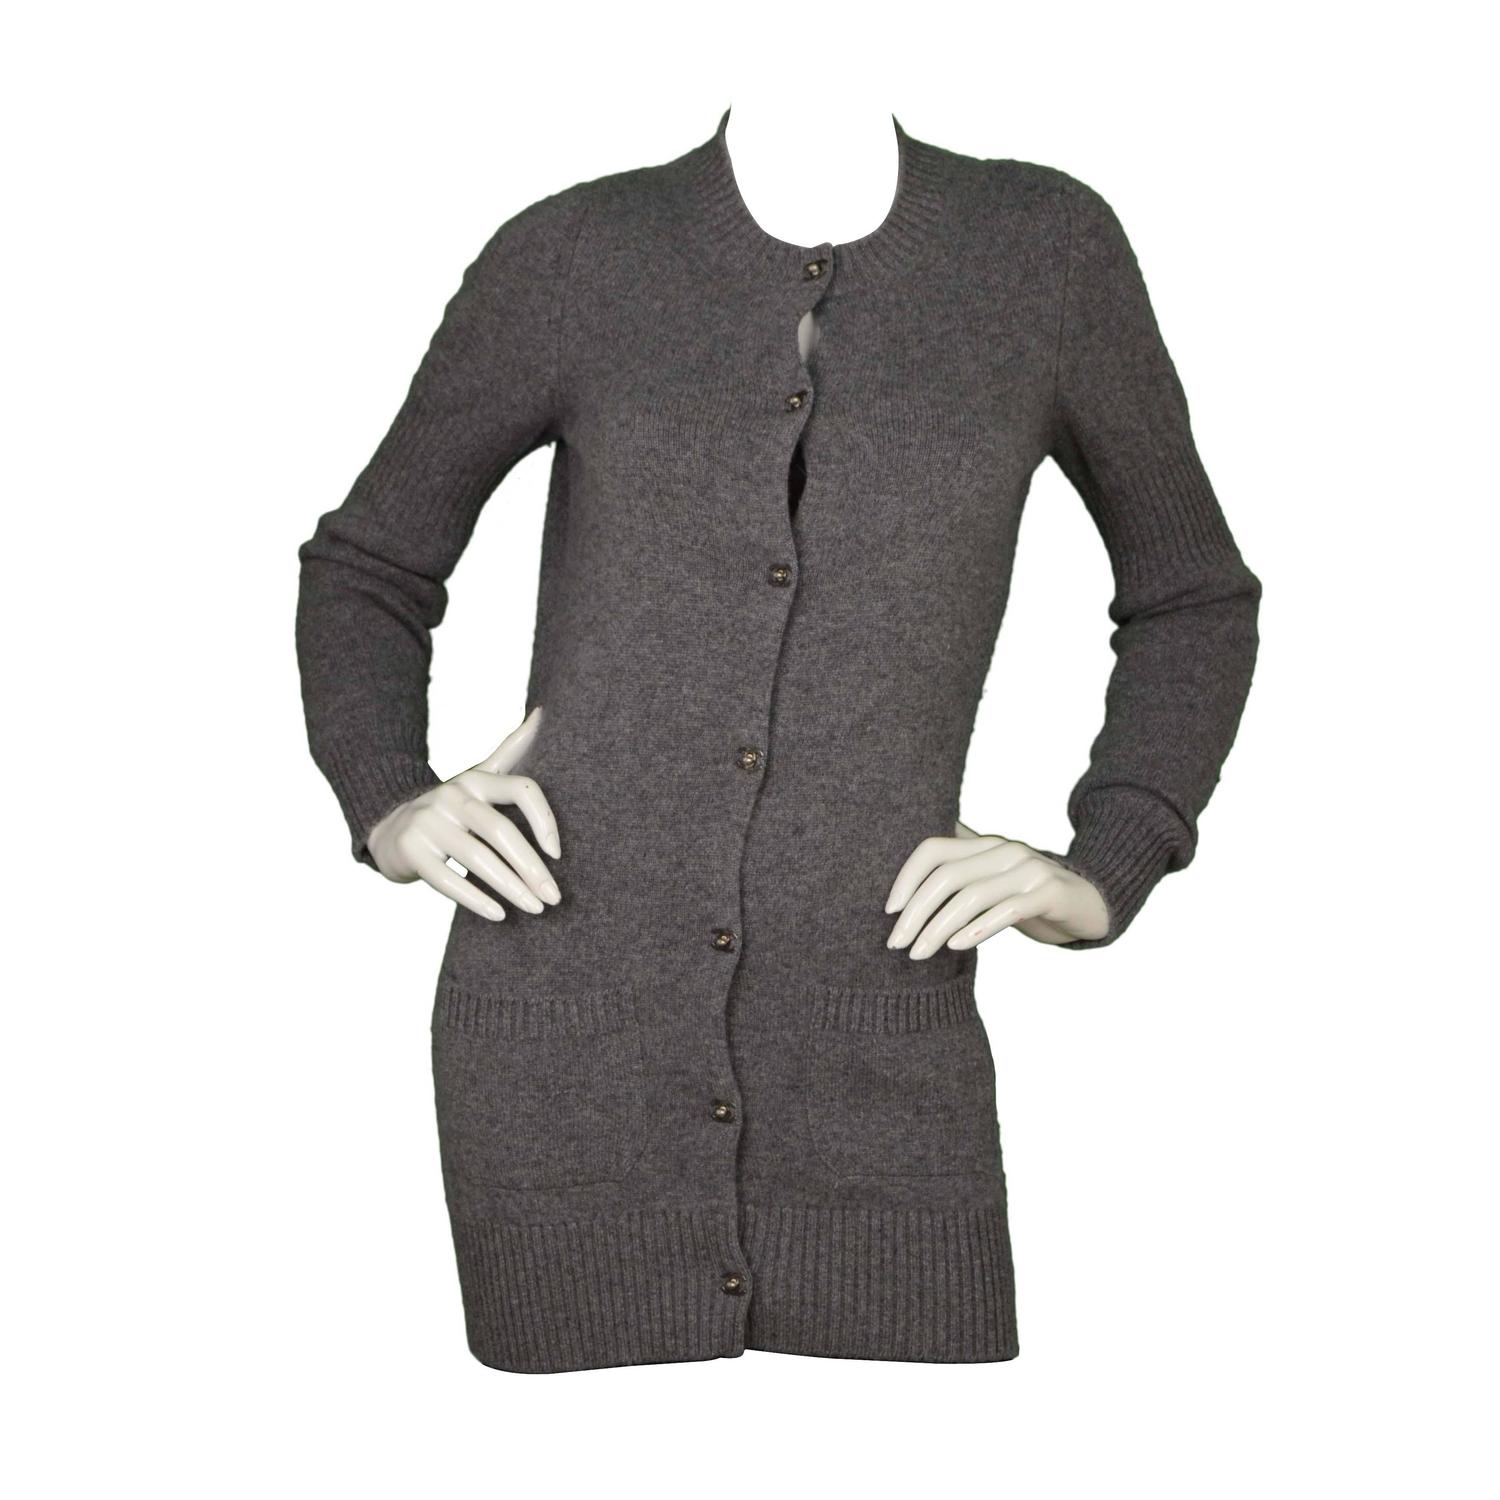 Chanel Grey Cashmere CC Button Long Cardigan Sweater sz 36 at 1stdibs